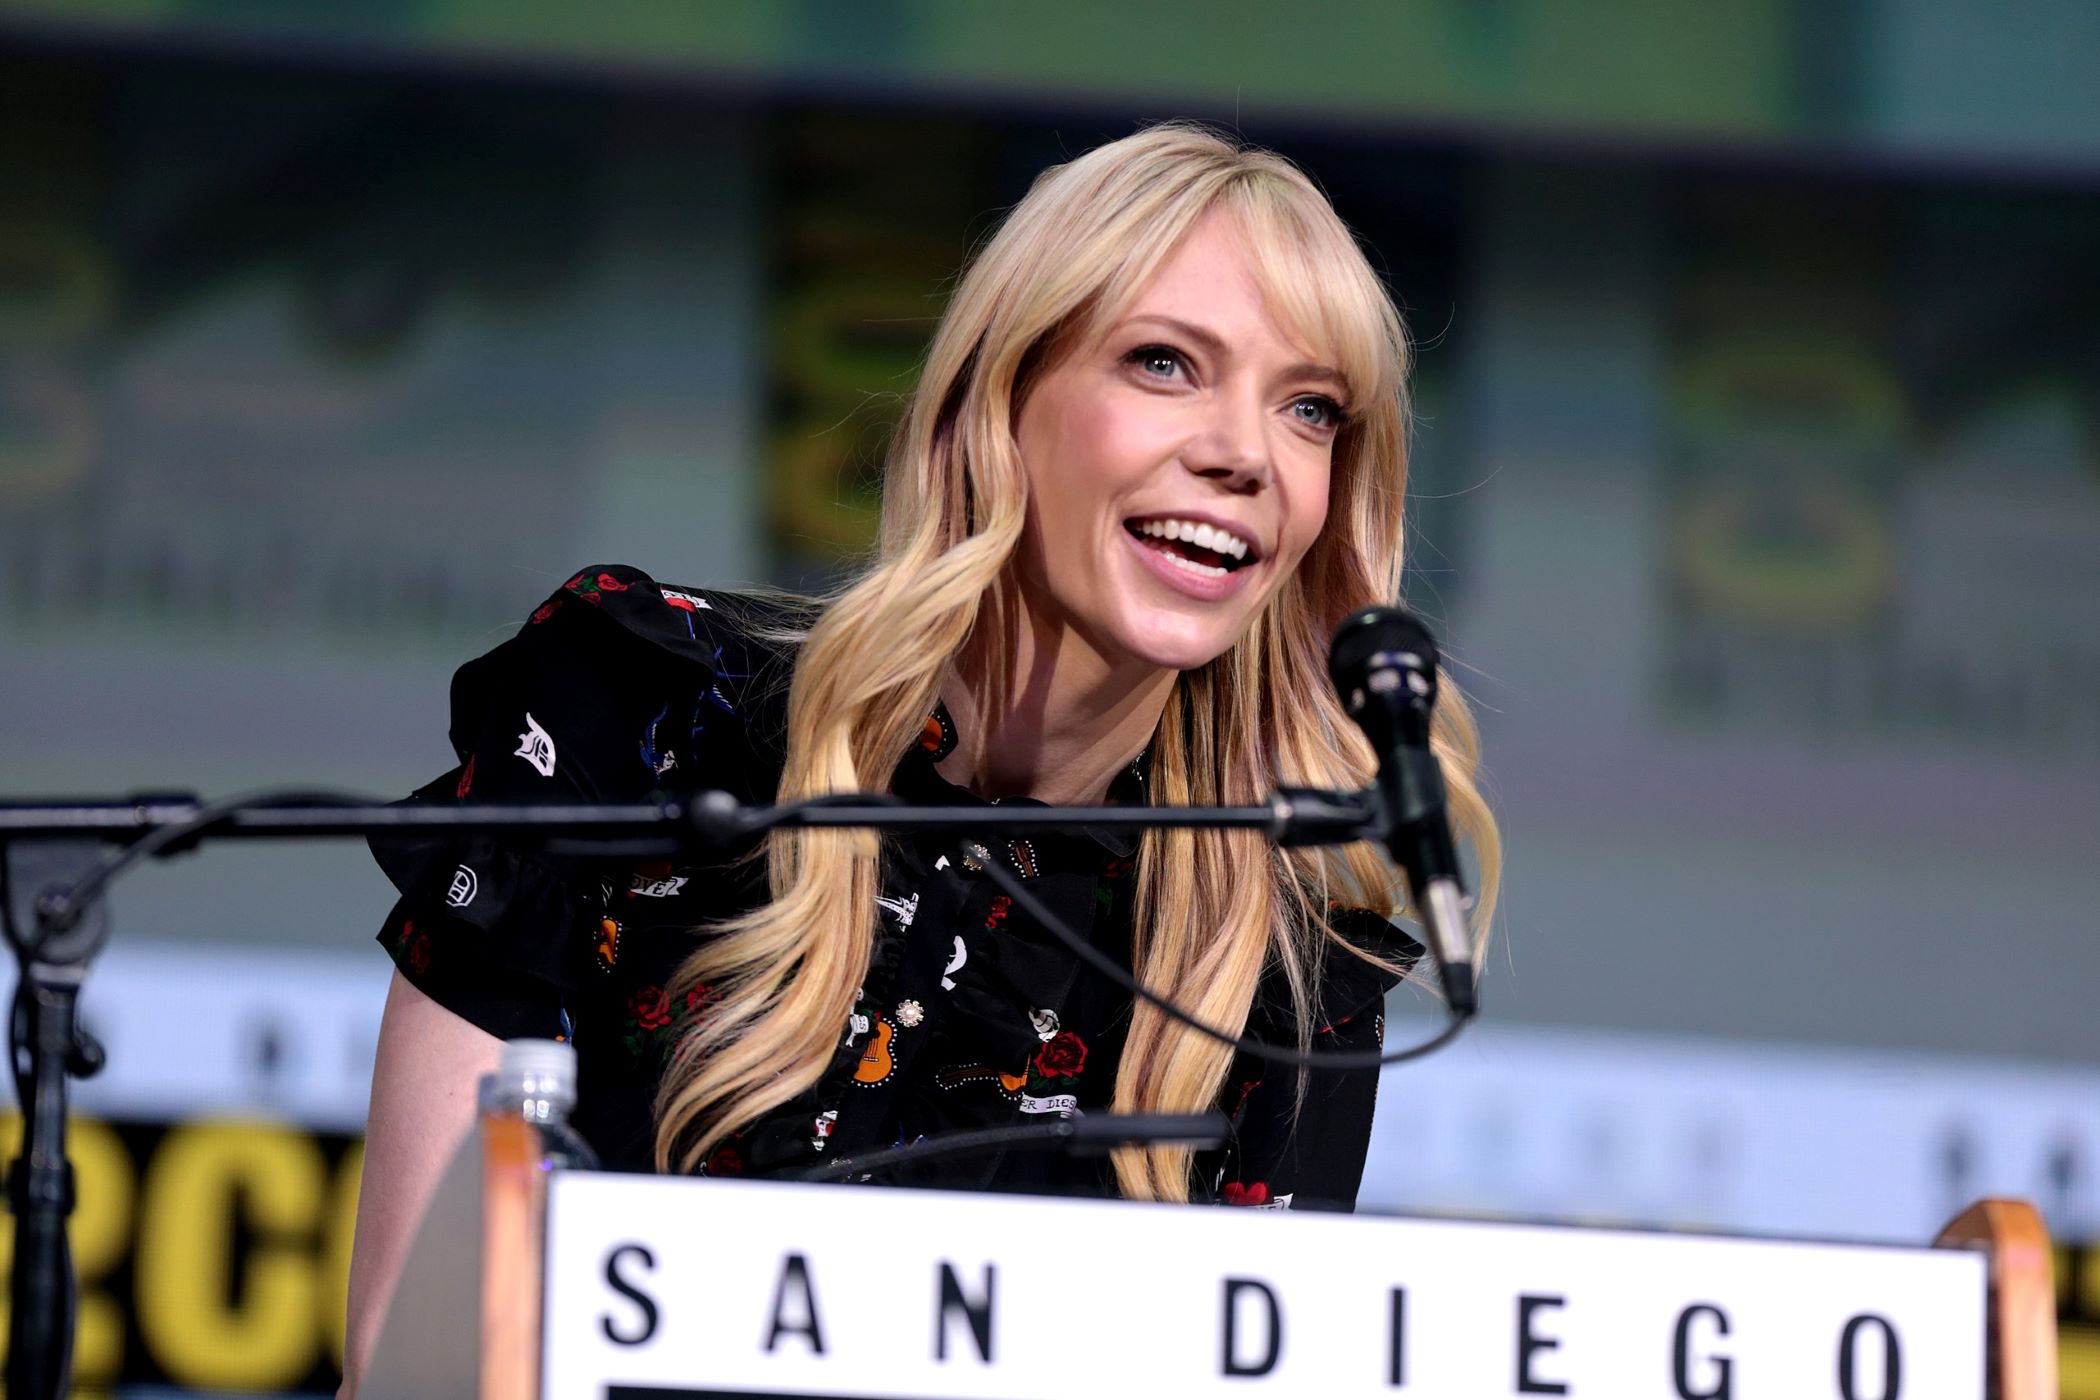 14-mind-blowing-facts-about-riki-lindhome